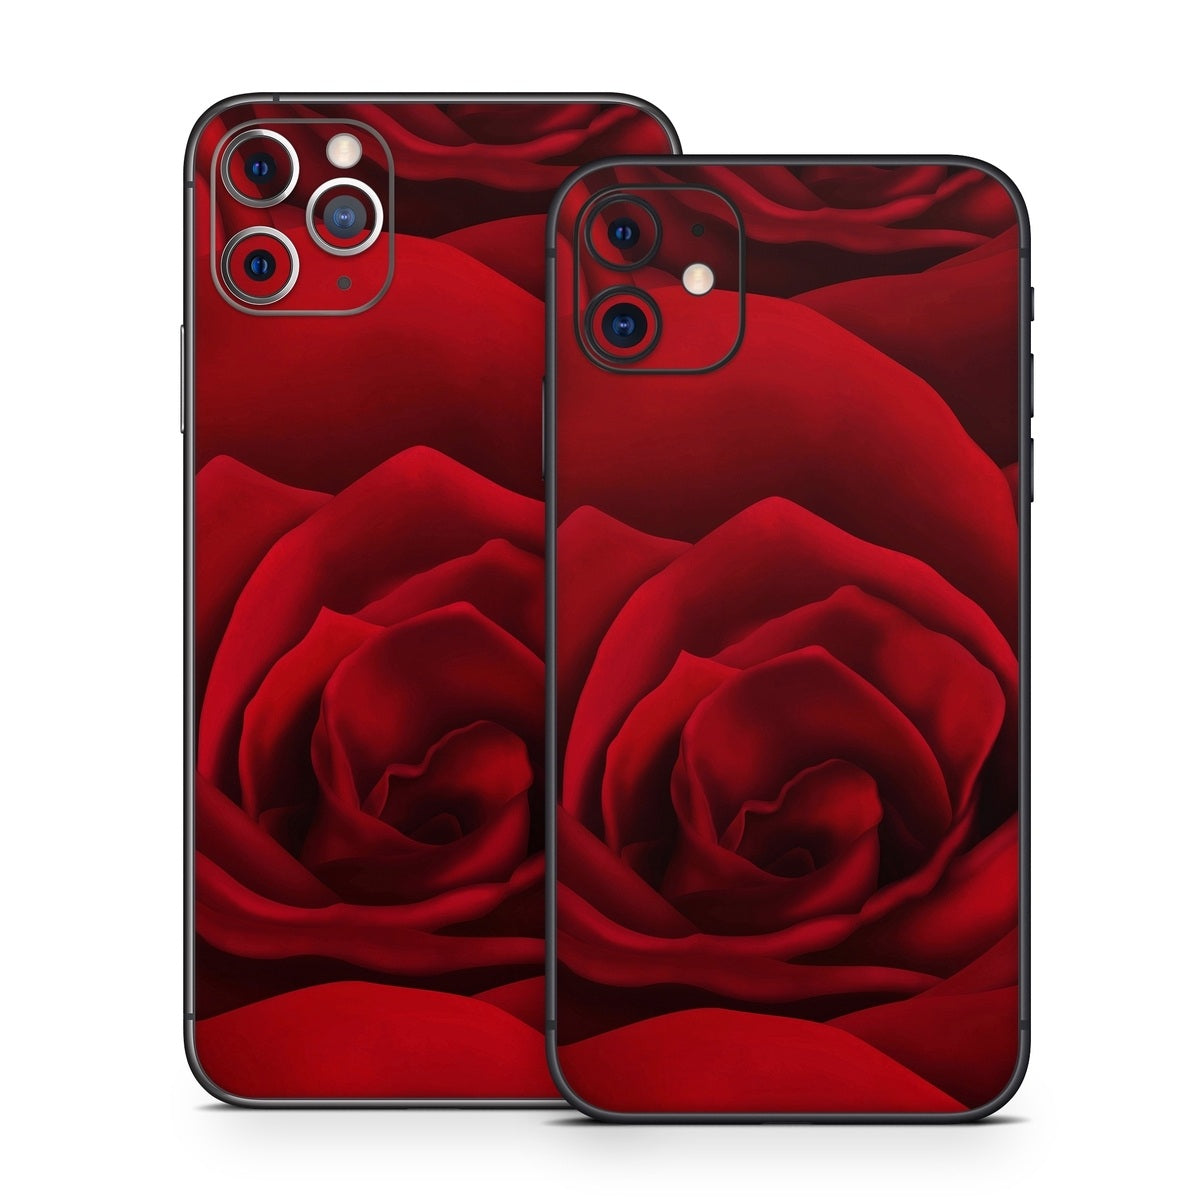 By Any Other Name - Apple iPhone 11 Skin